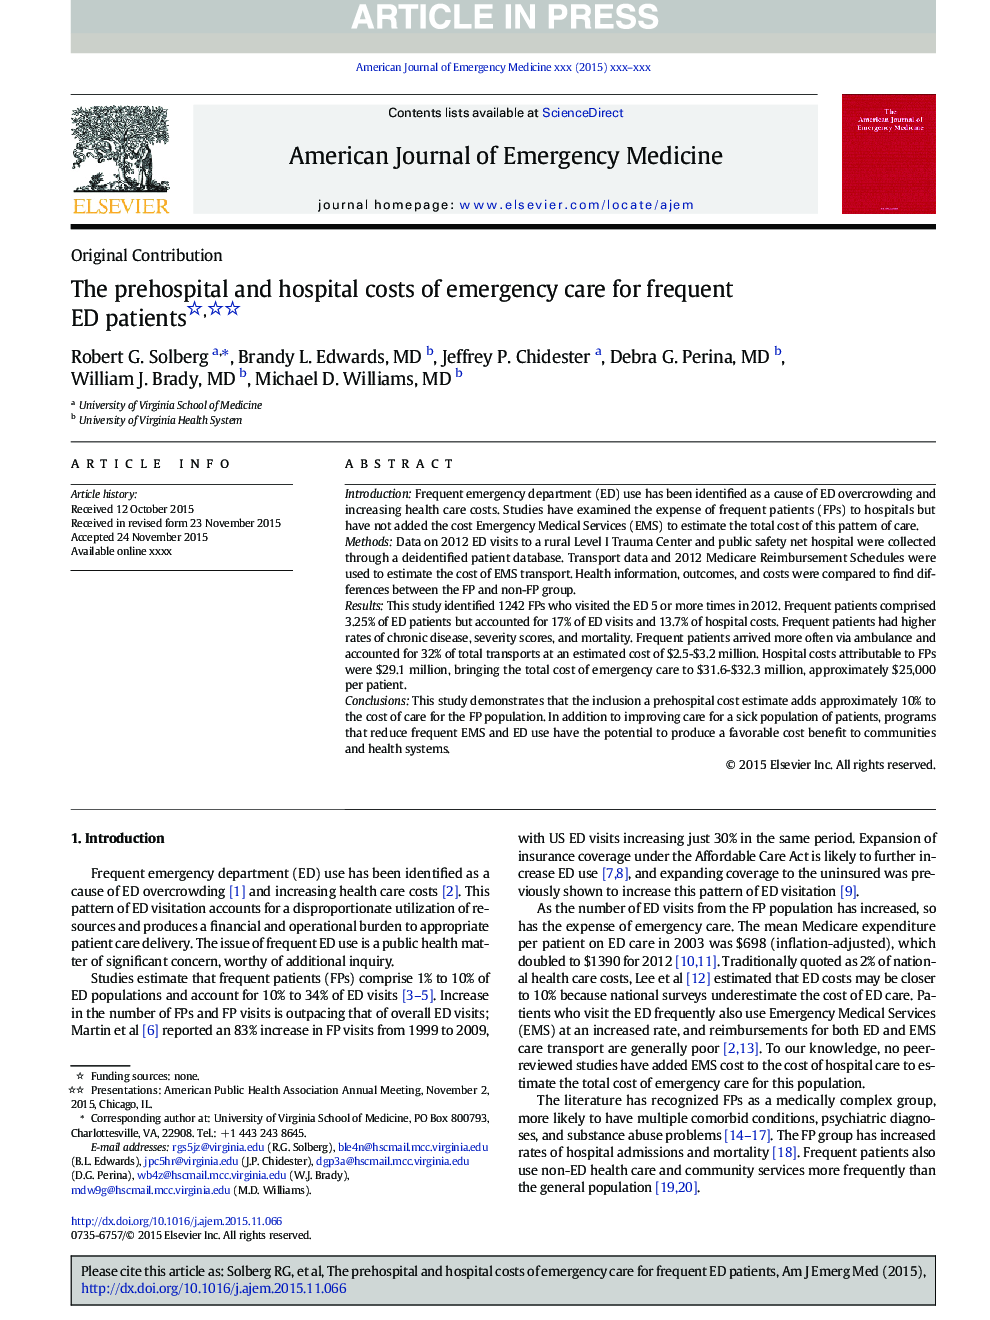 The prehospital and hospital costs of emergency care for frequent ED patients